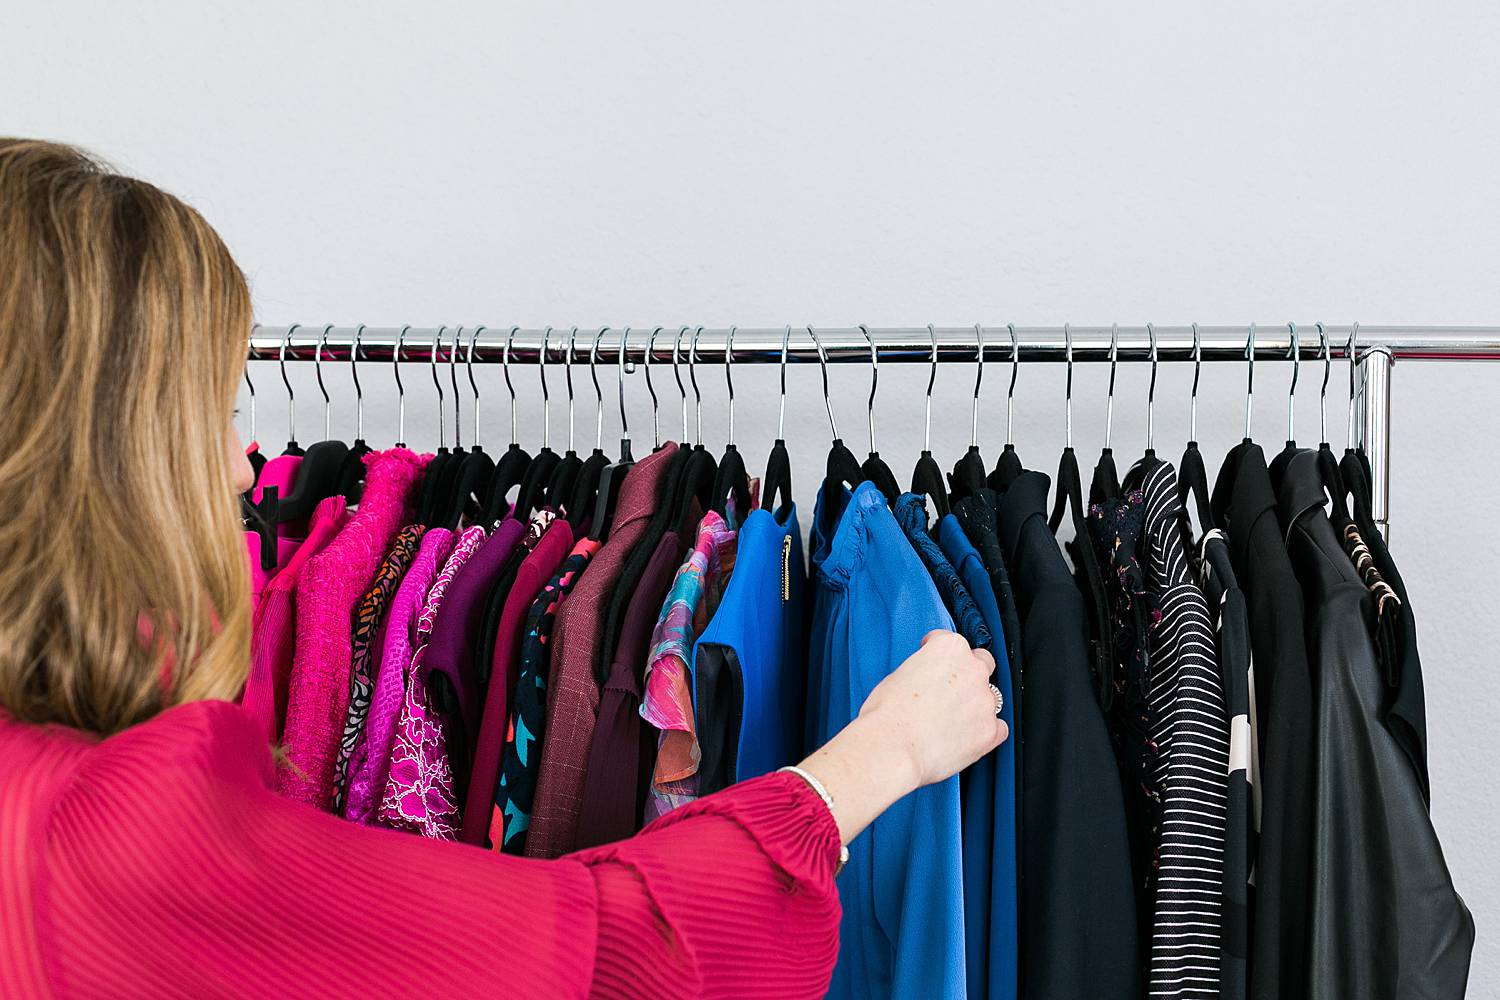 image consultant choosing an outfit from rolling wardrobe rack